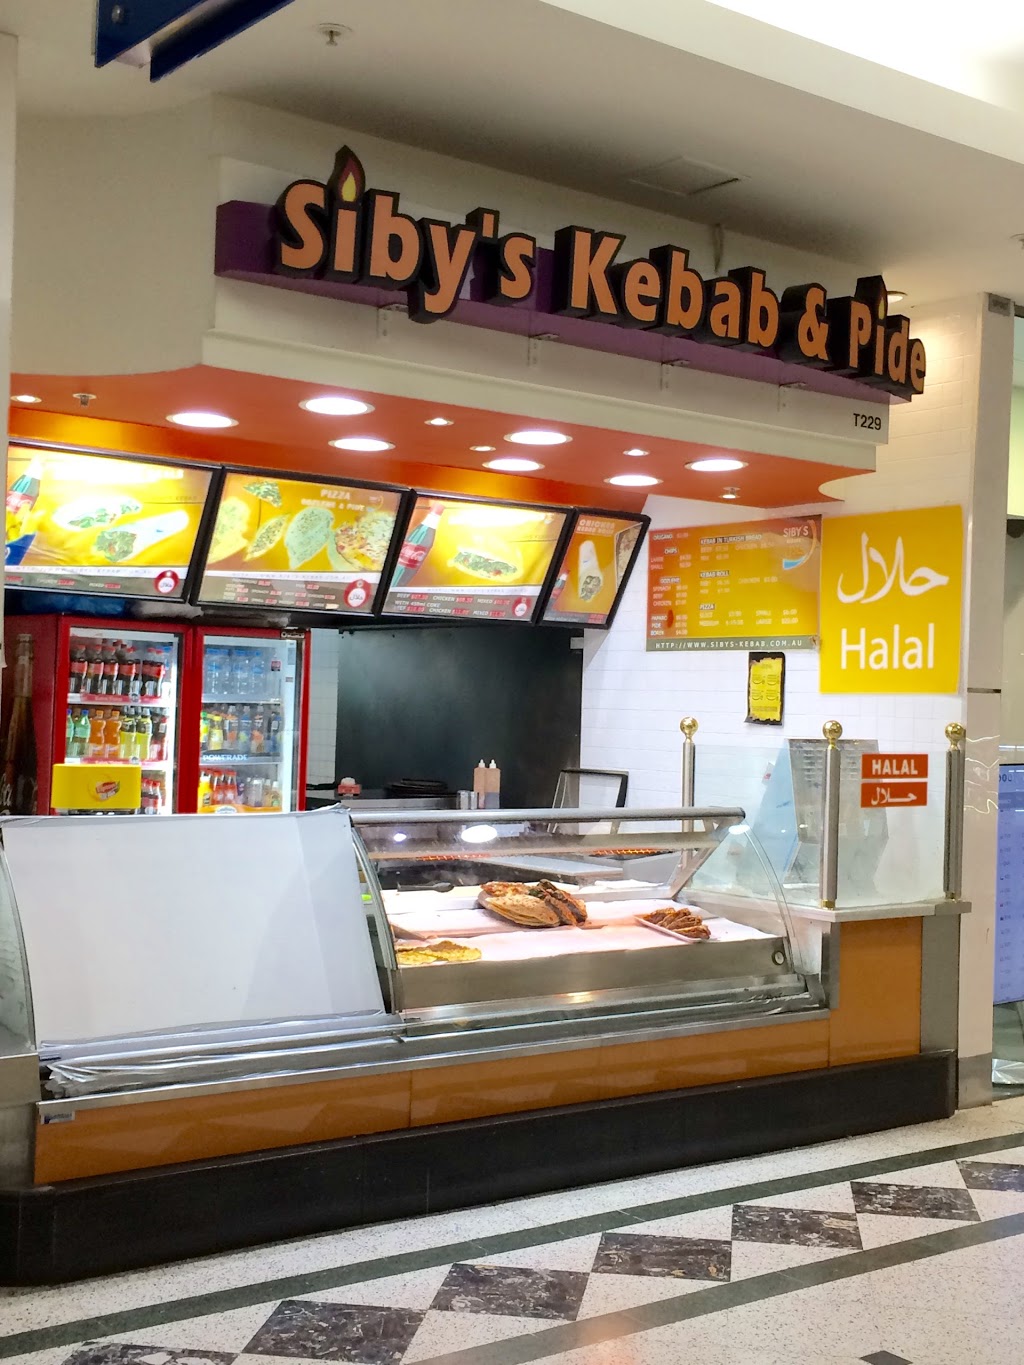 Sibys Kebabs and Pide | restaurant | Stacey St, Bankstown NSW 2200, Australia | 0420837913 OR +61 420 837 913